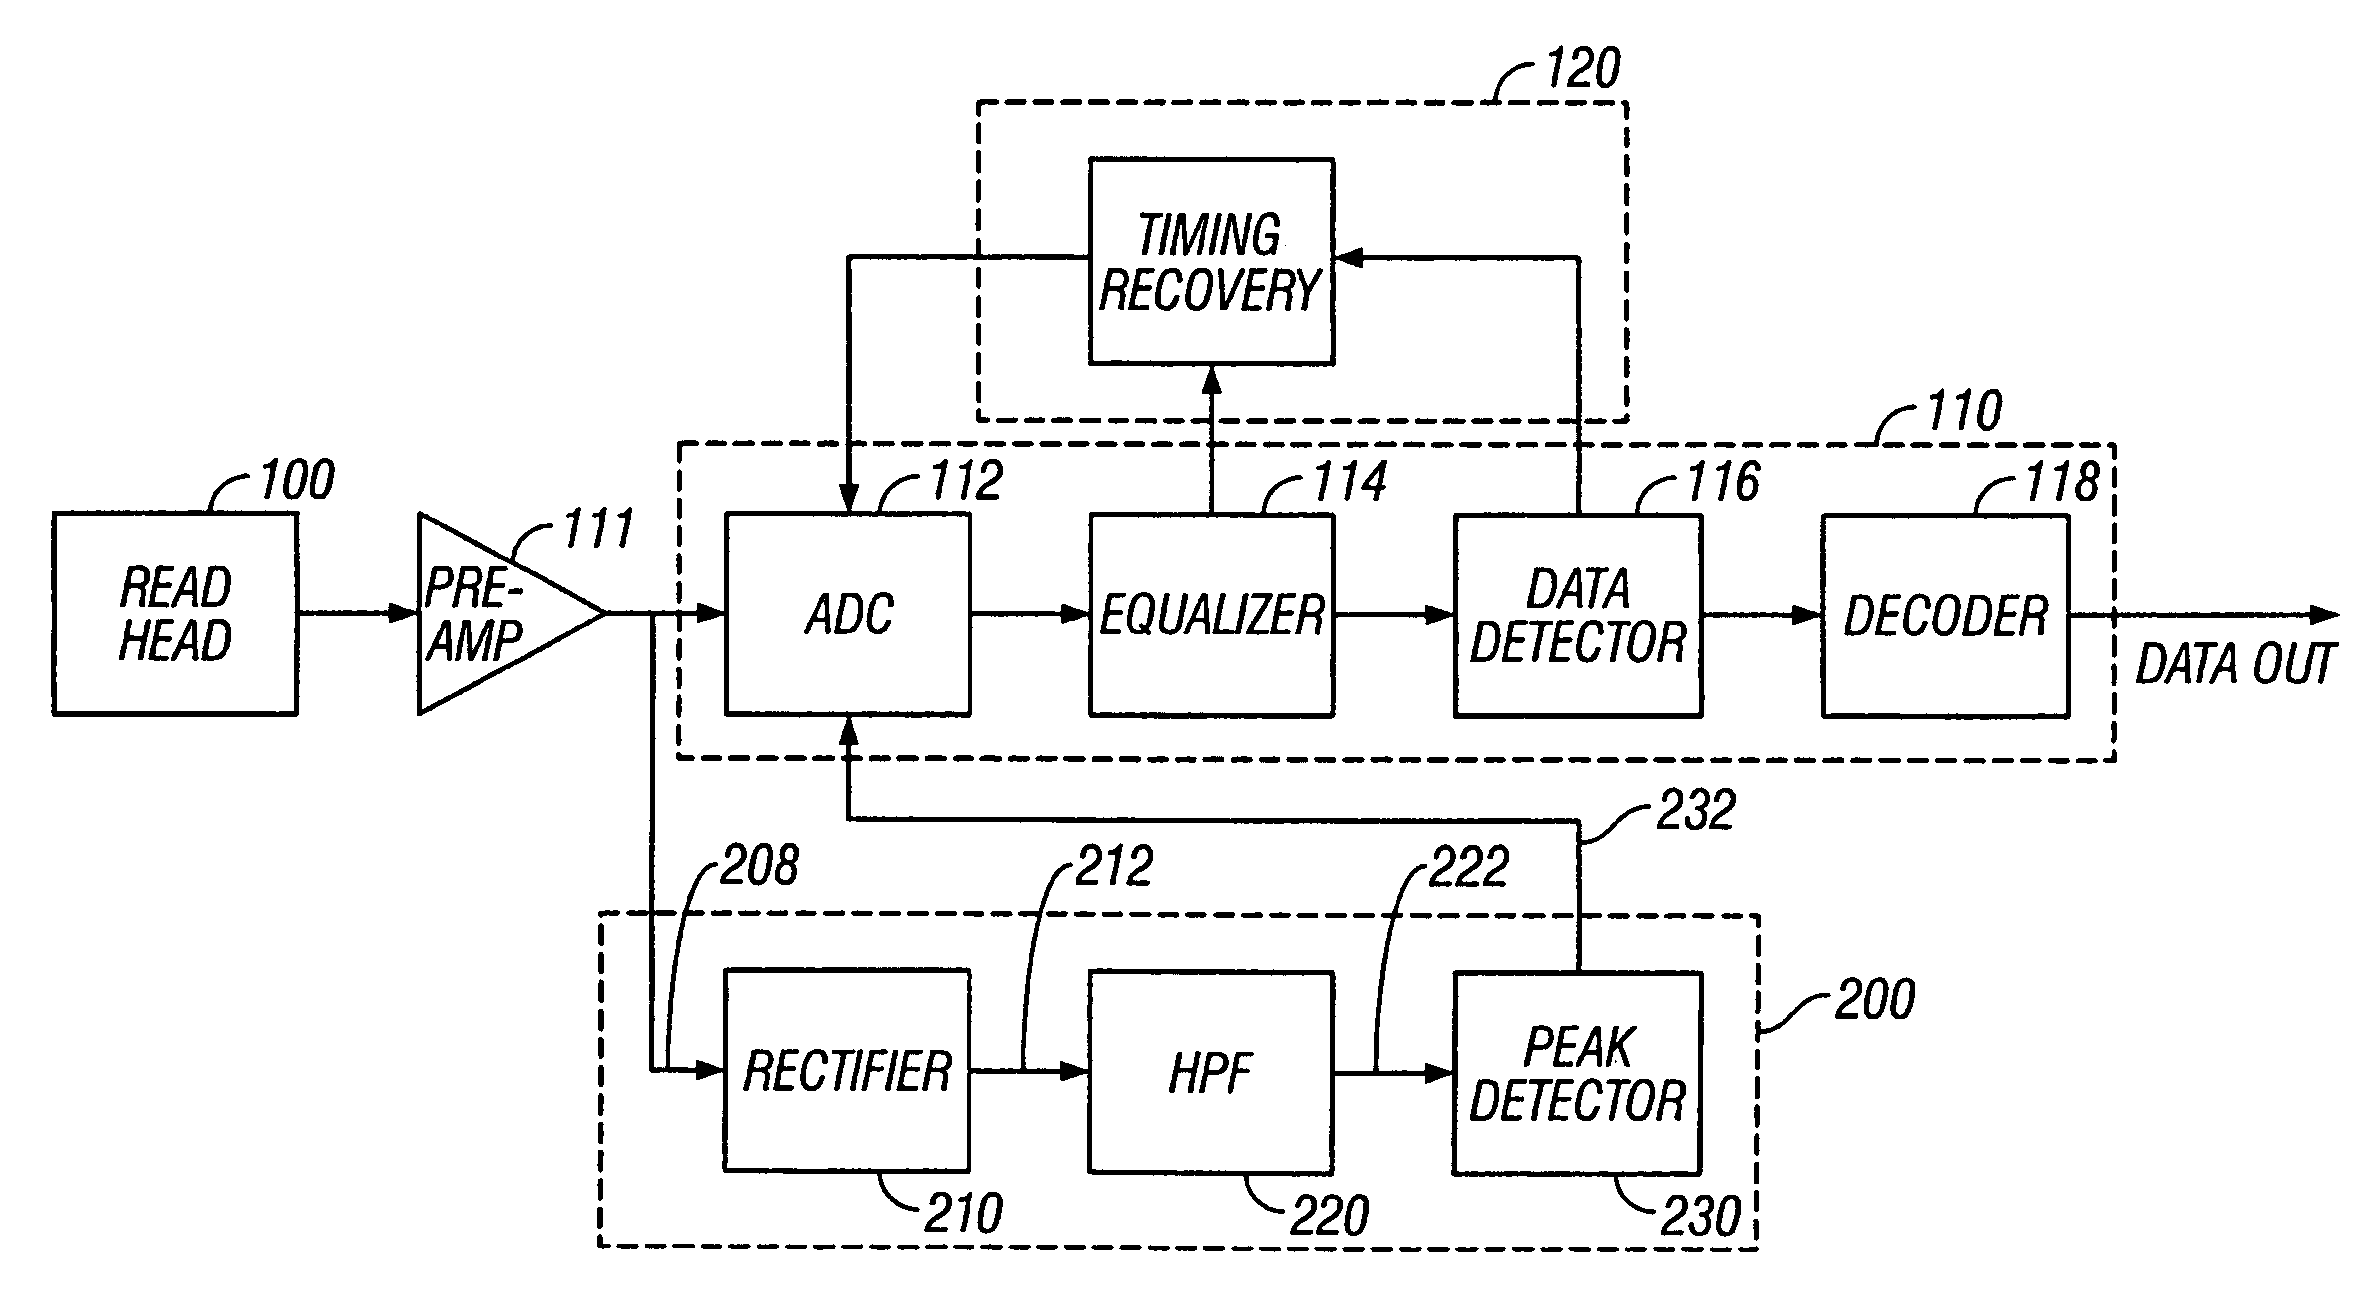 Magnetic recording disk drive with patterned media and circuit for generating timing pulses from the pattern